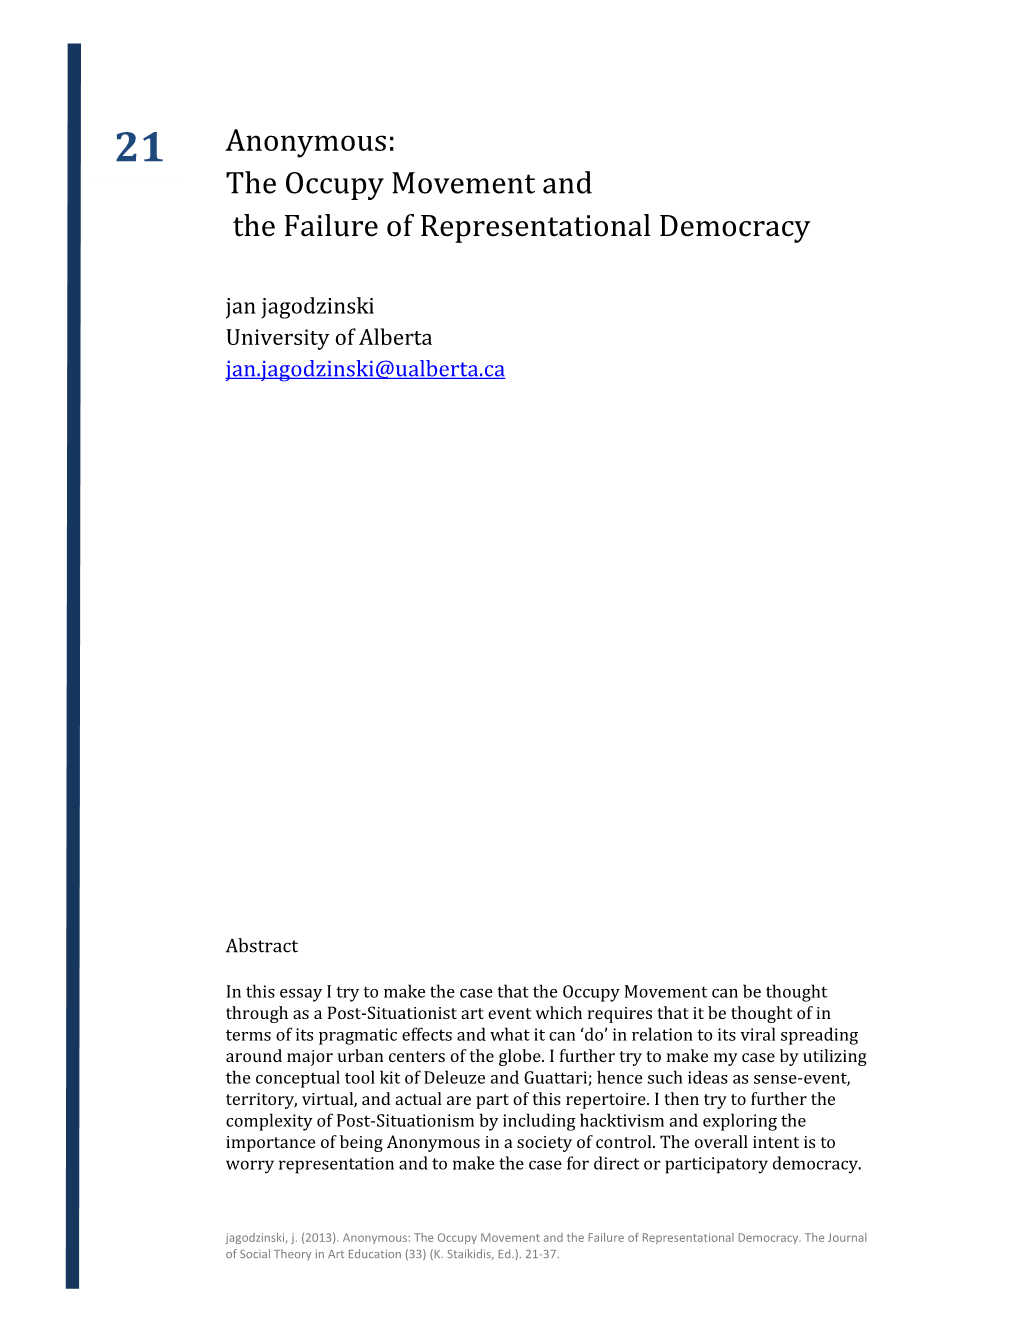 Anonymous: the Occupy Movement and the Failure of Representational Democracy